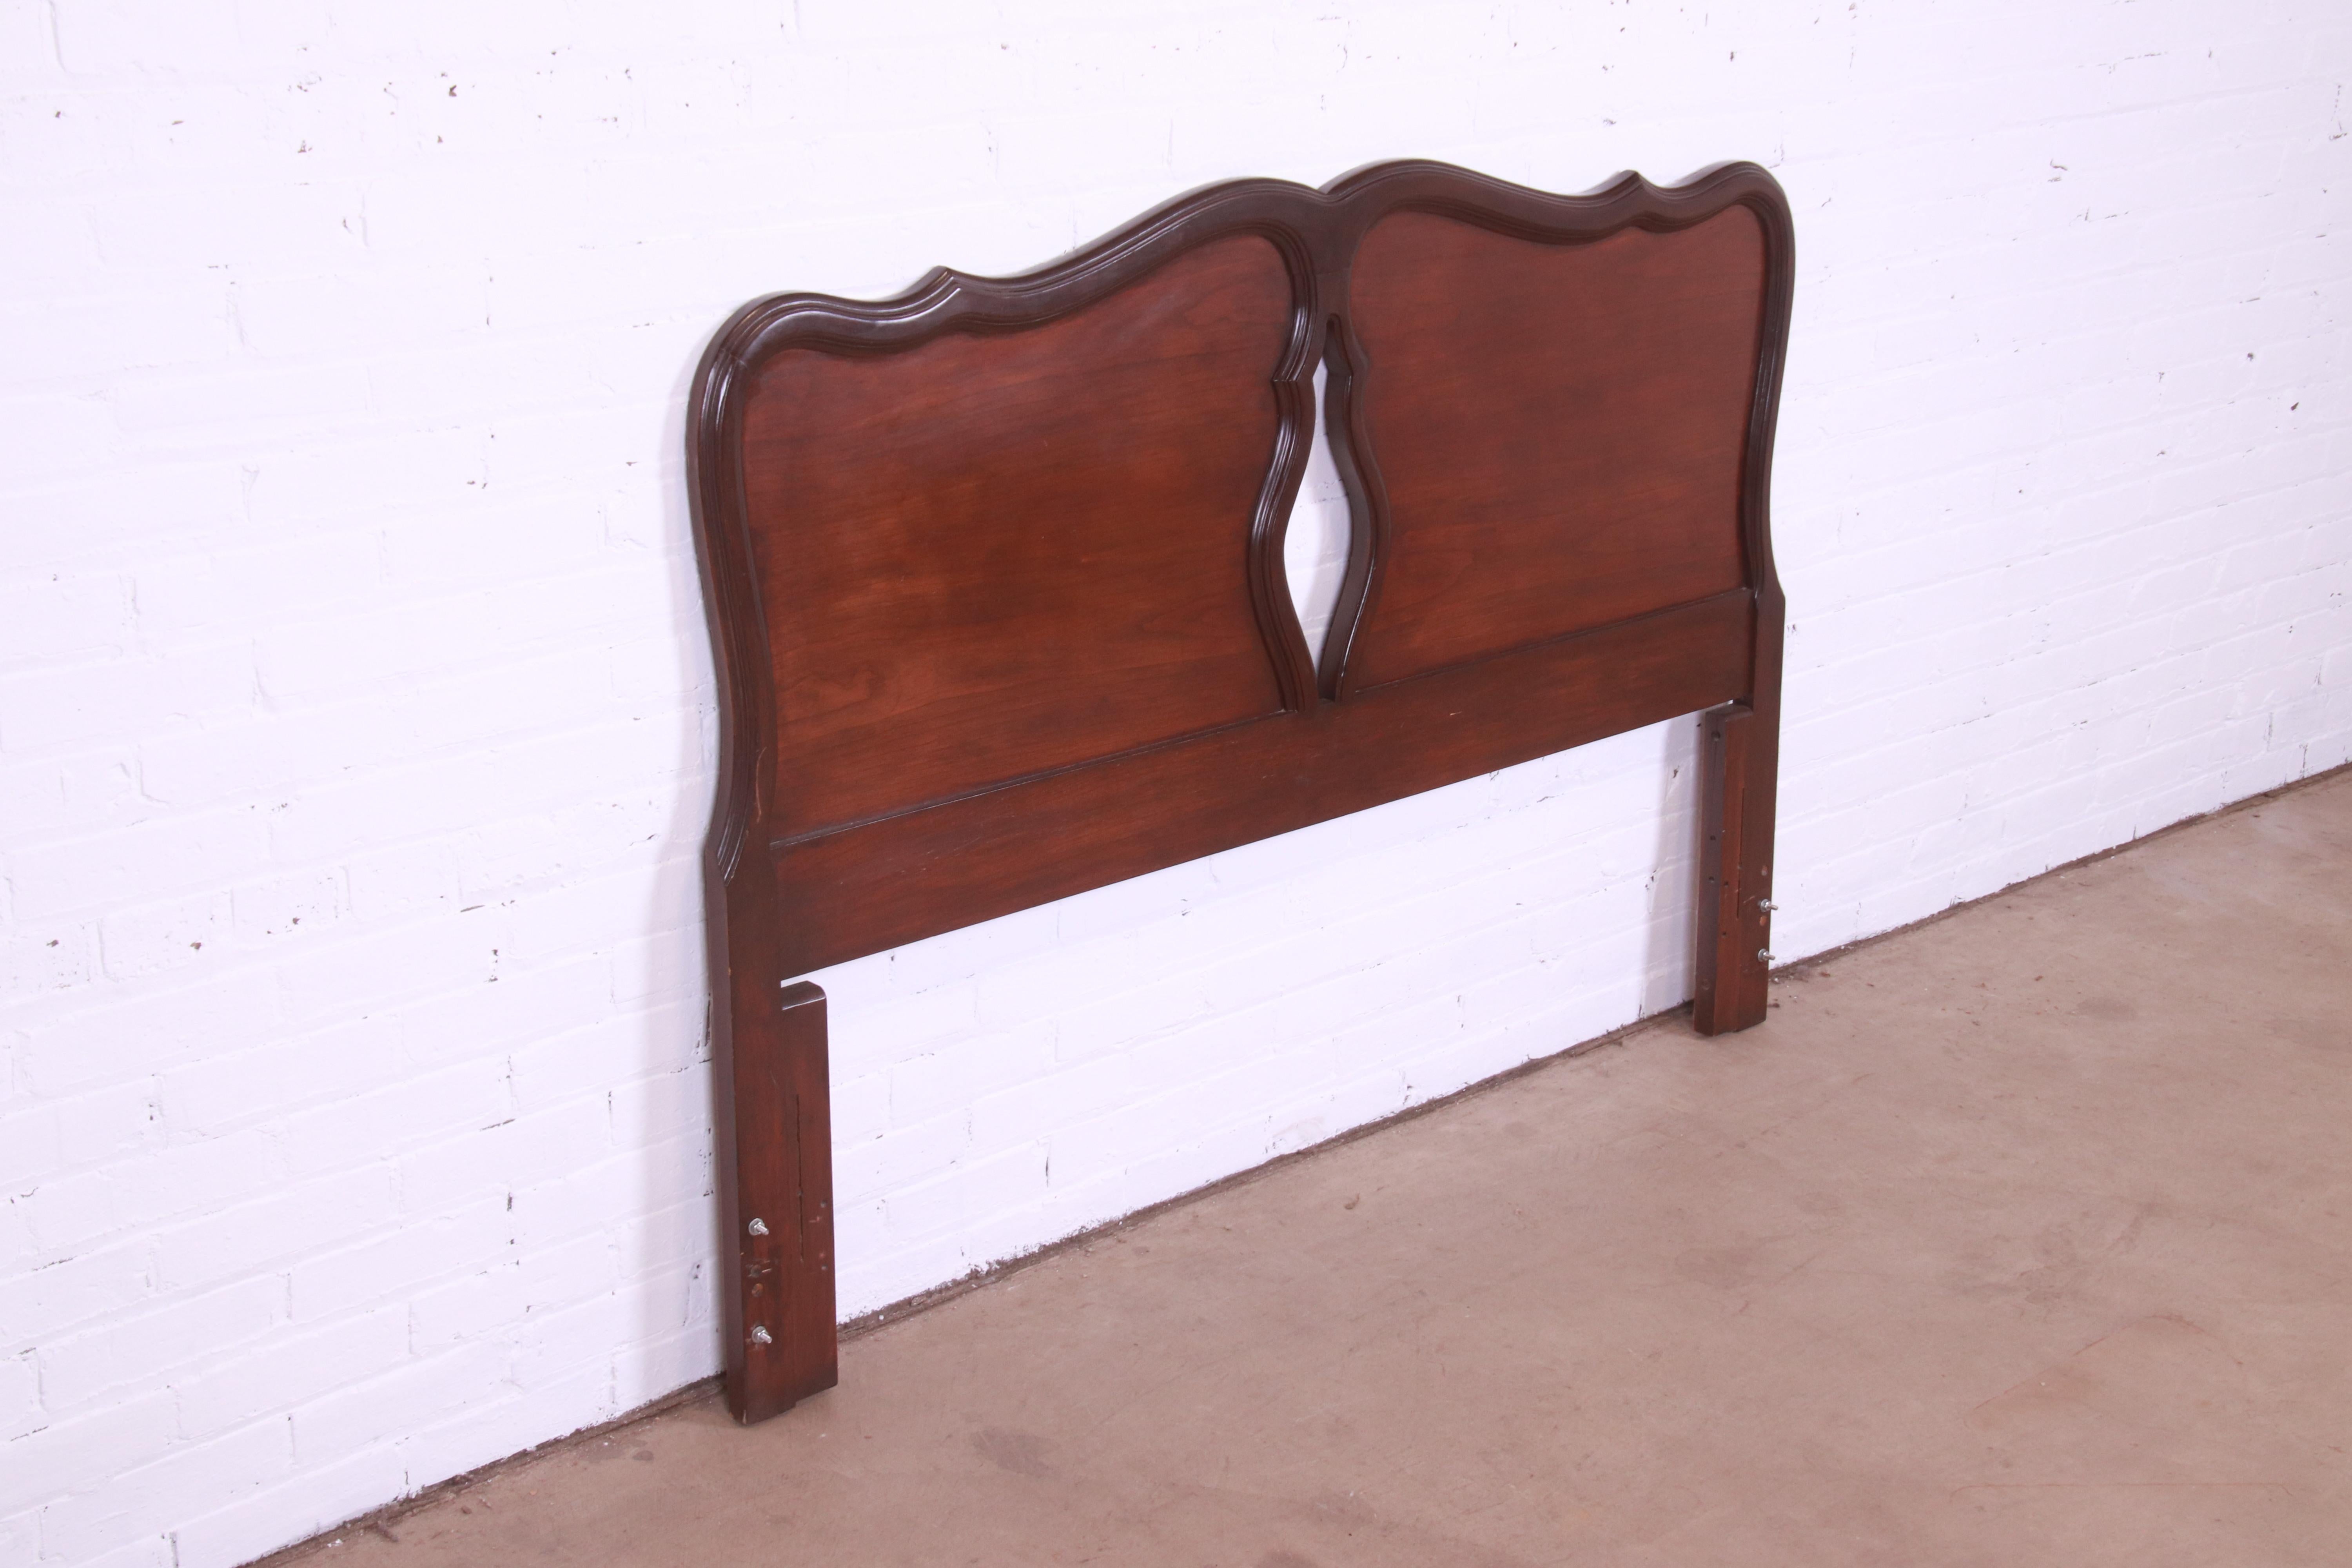 20th Century Kling Furniture French Provincial Carved Mahogany Full or Queen Size Headboard